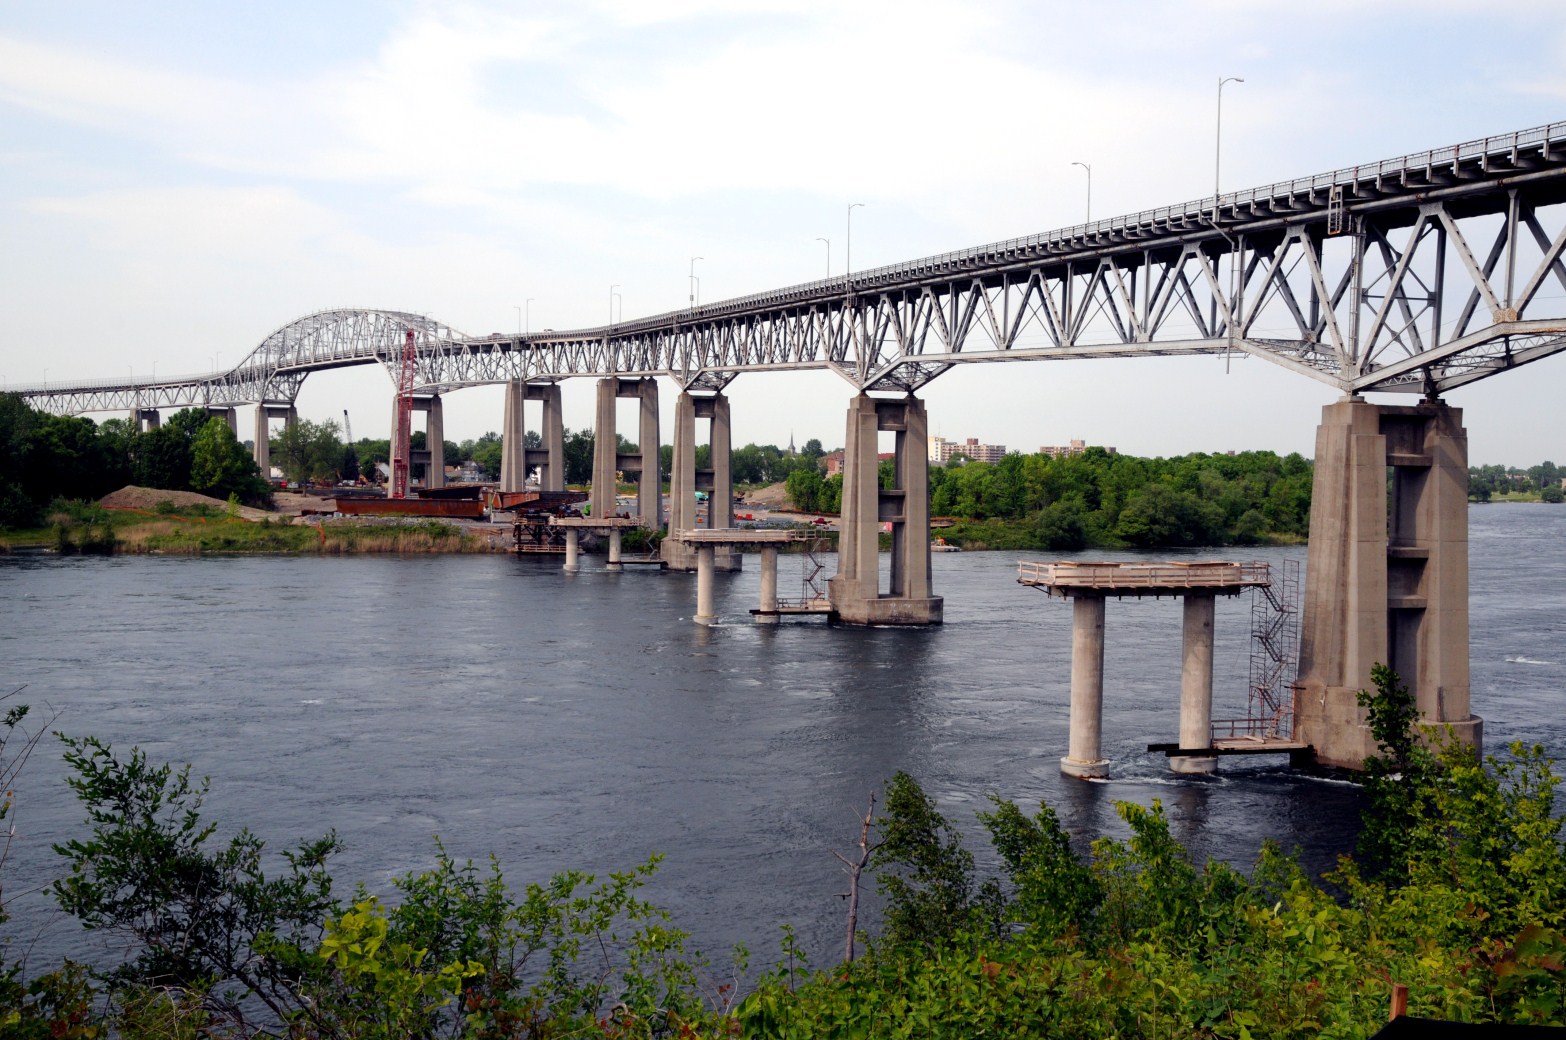 Bridge could be completely down in just 18 months: Dorland